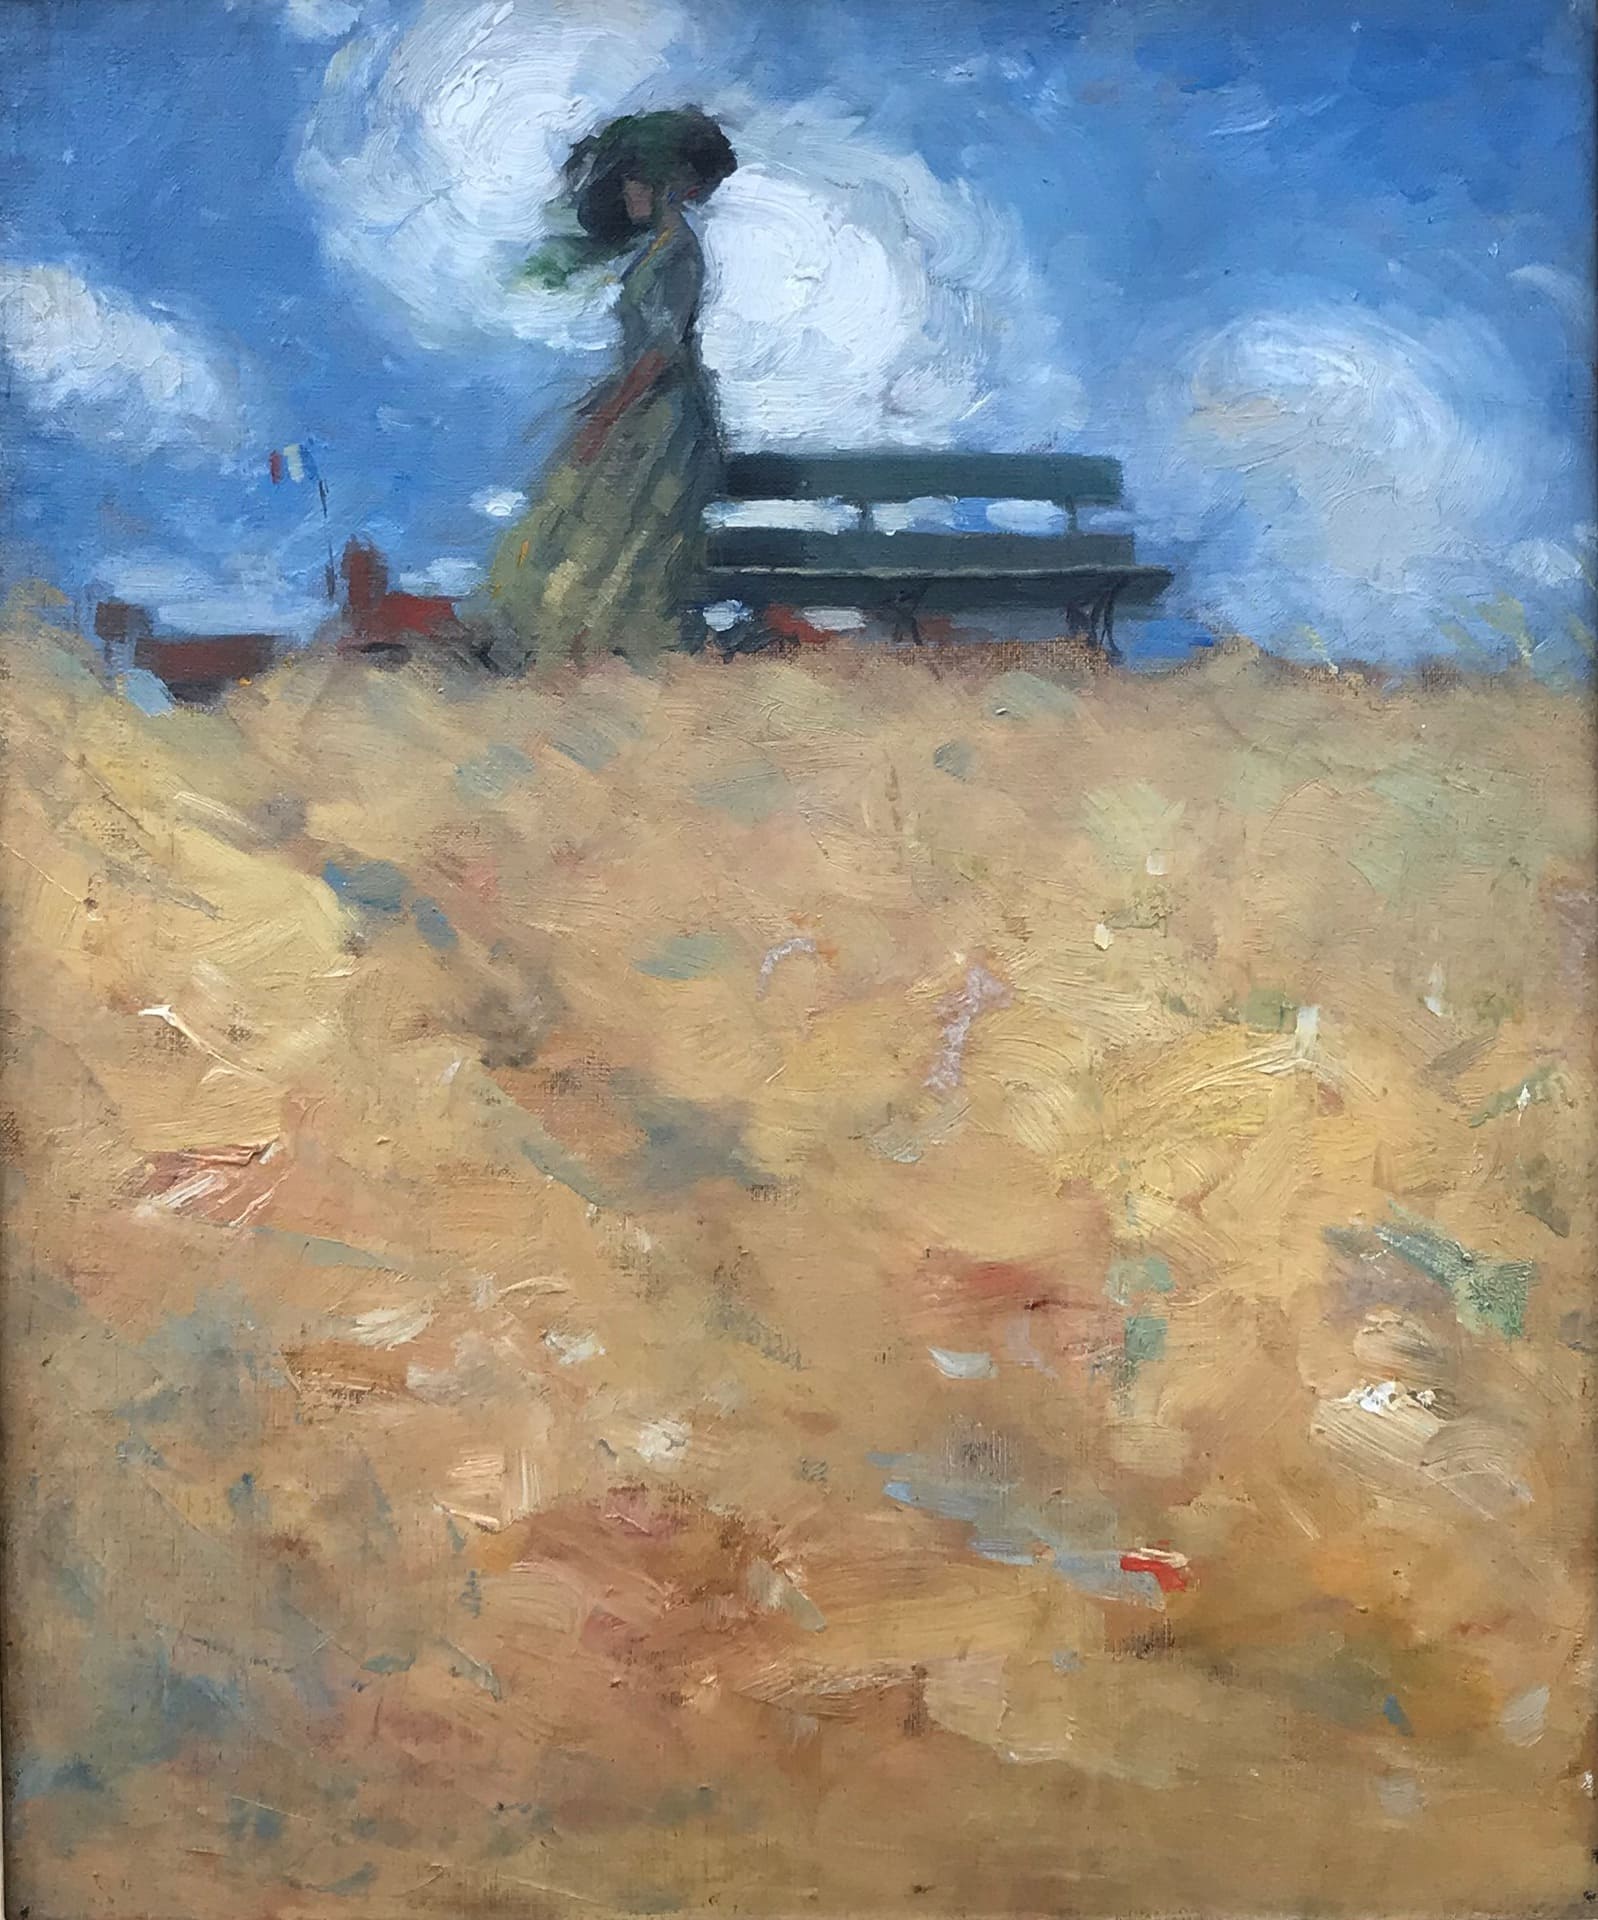 Mackay's Woman with a Parasol. Impressionist brushwork. Vast golden field, blue sky, white clouds, woman in the background in elegant hat.